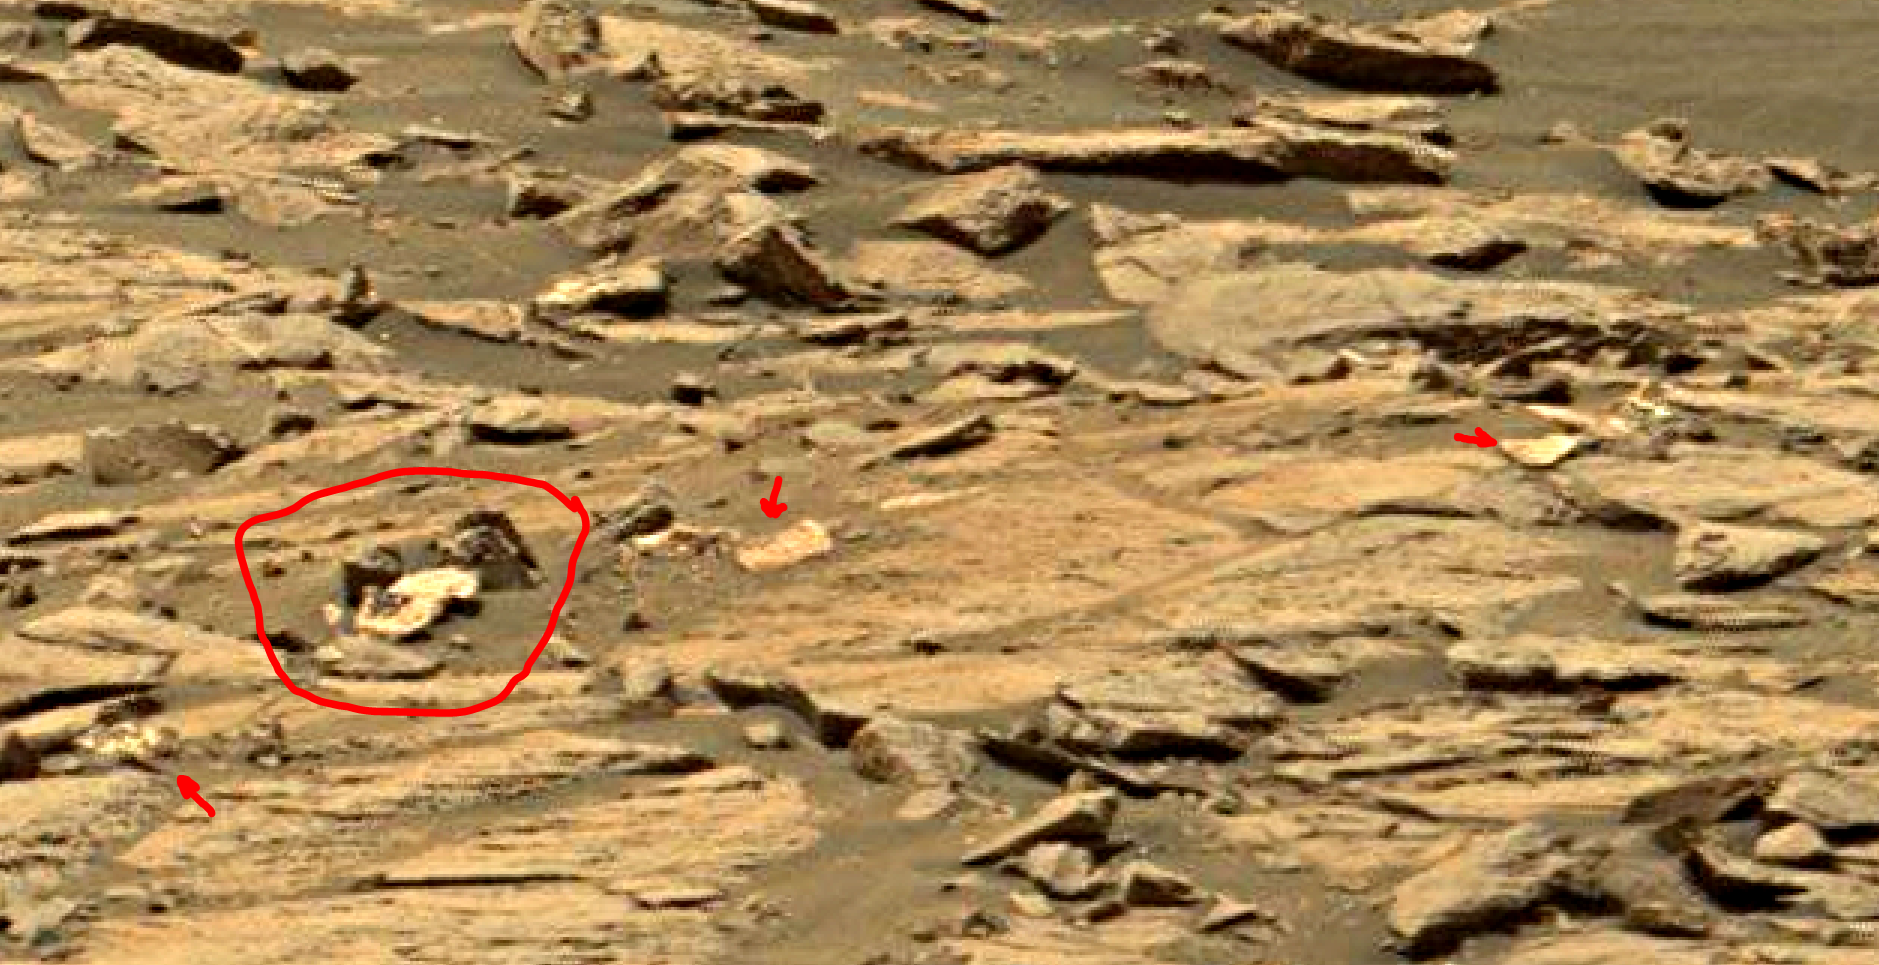 mars sol 1447 anomaly artifacts 1a - was life on mars